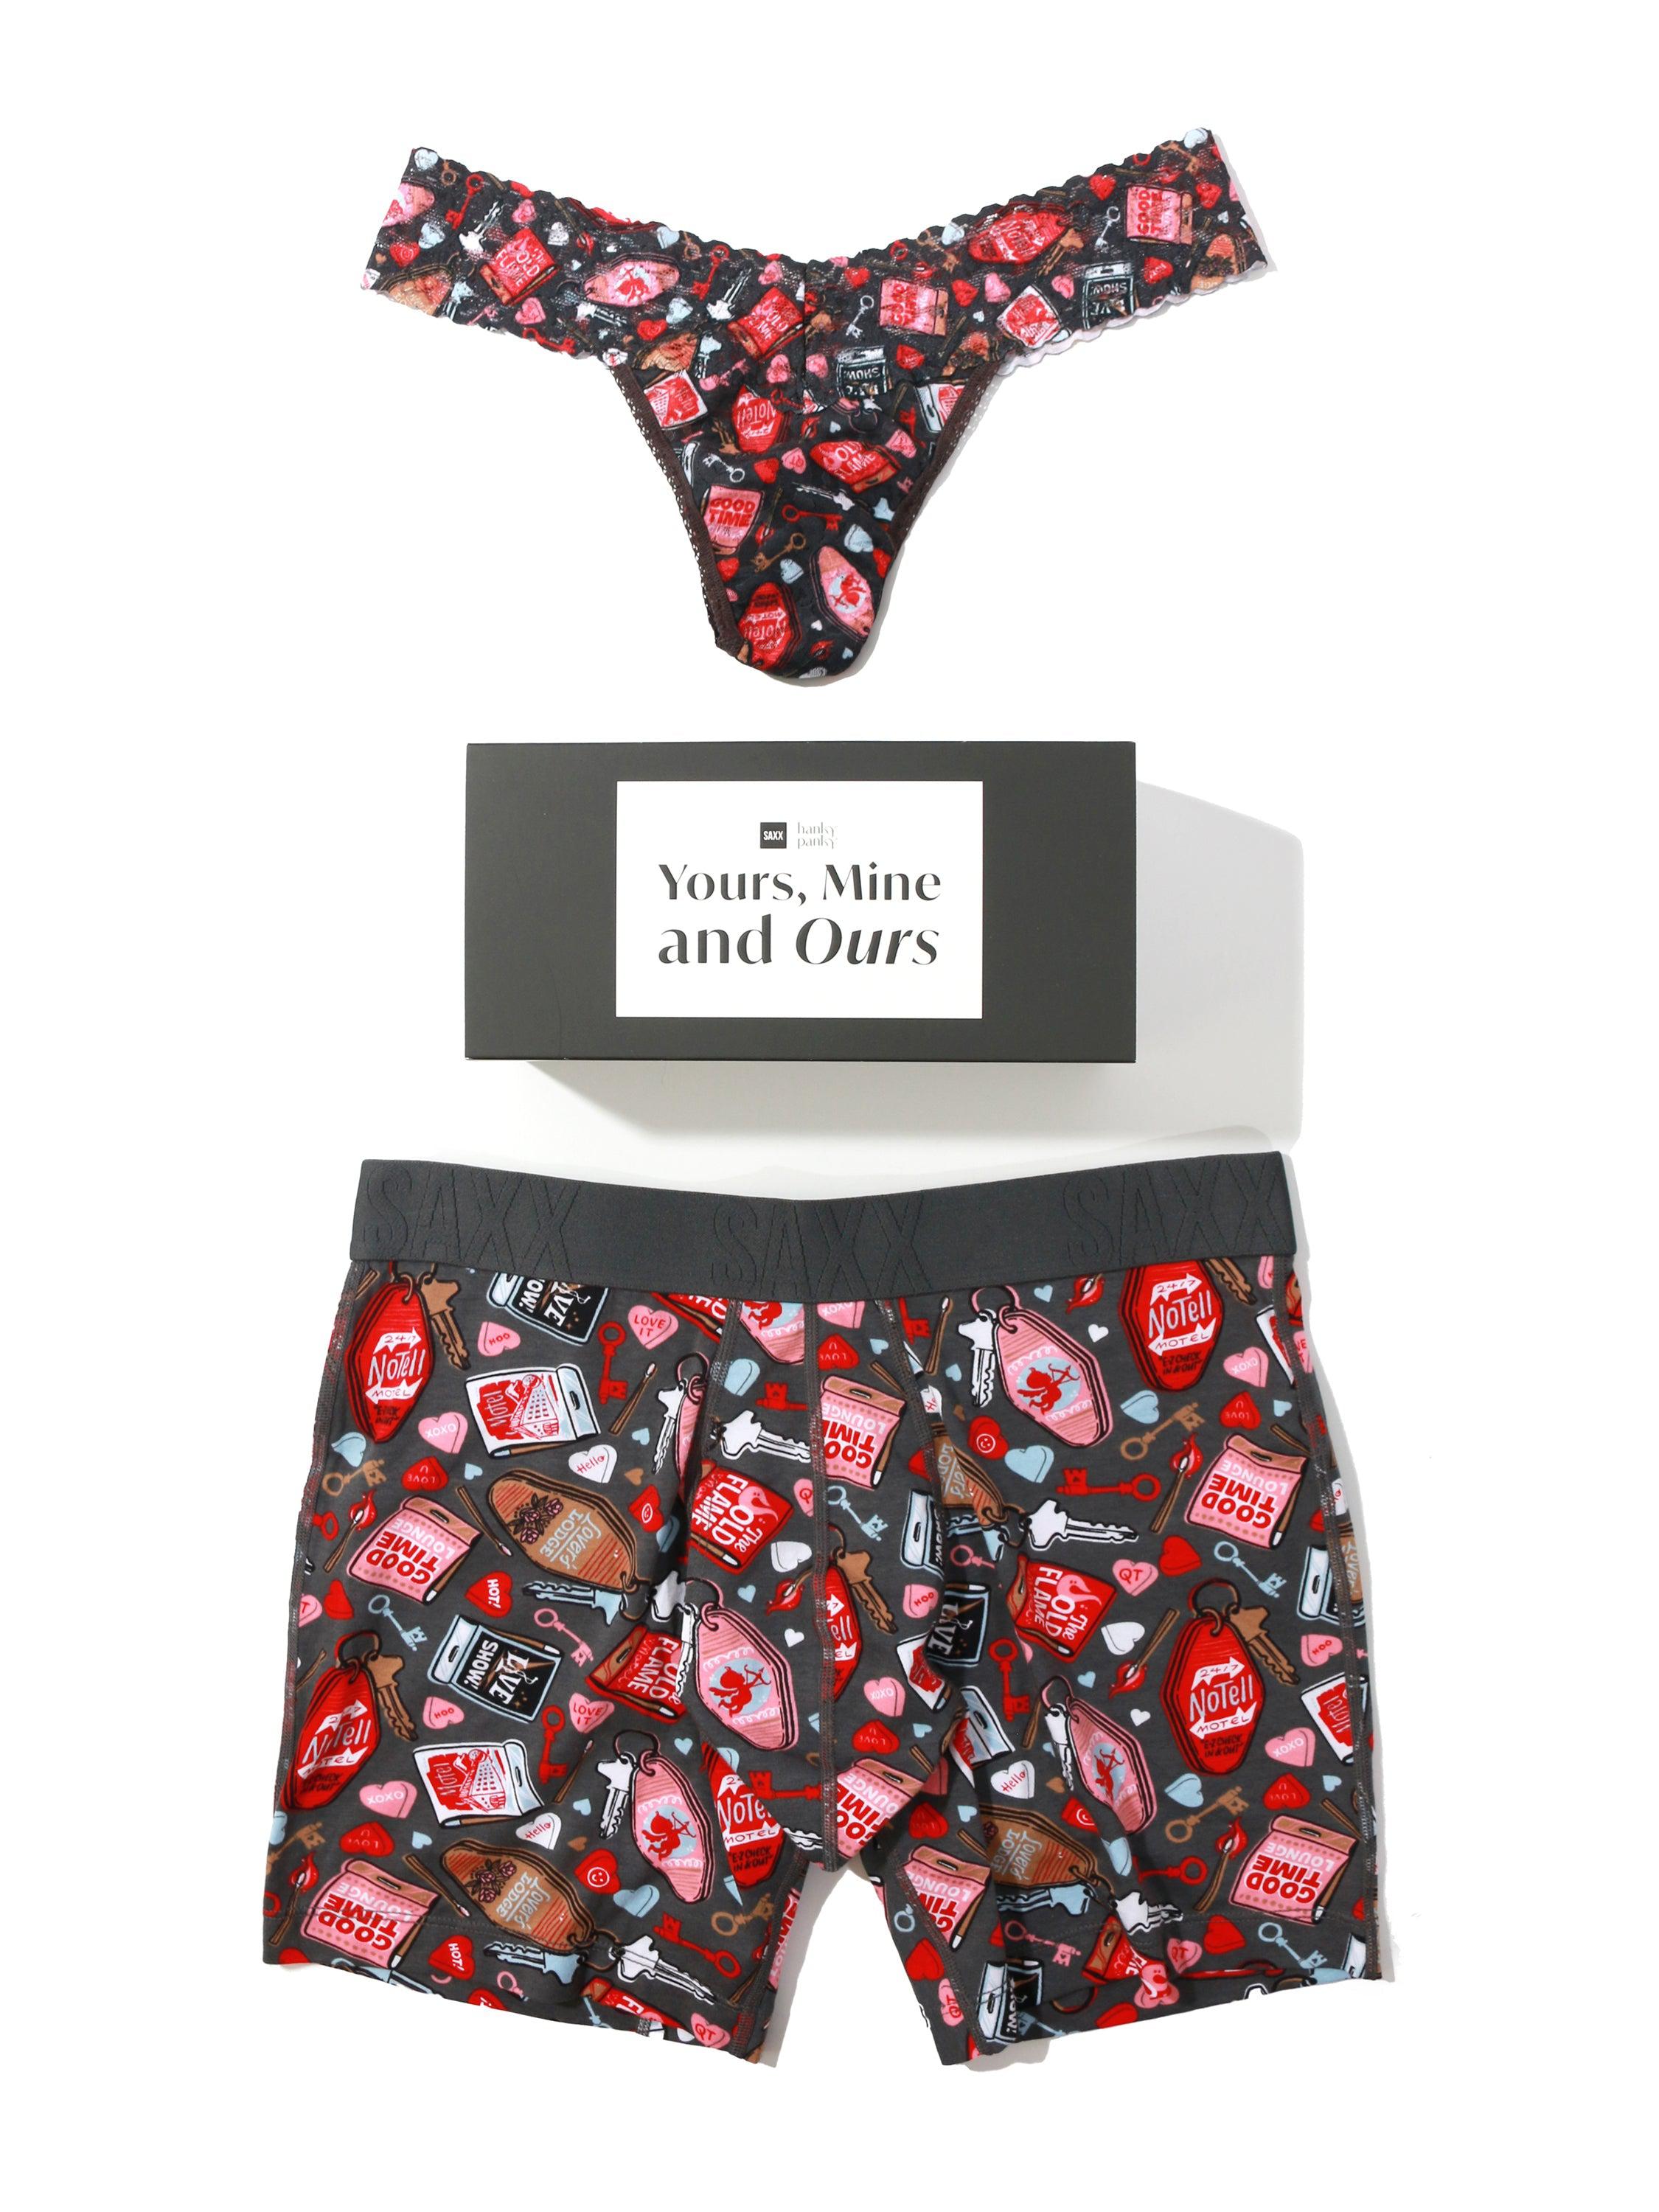 Your Lucky Day Sexy Couple Matching Underwear, Valentines Day Gift,  Matching Underwear Couple Set, His and Hers Underwear, Matching Undies -   Canada